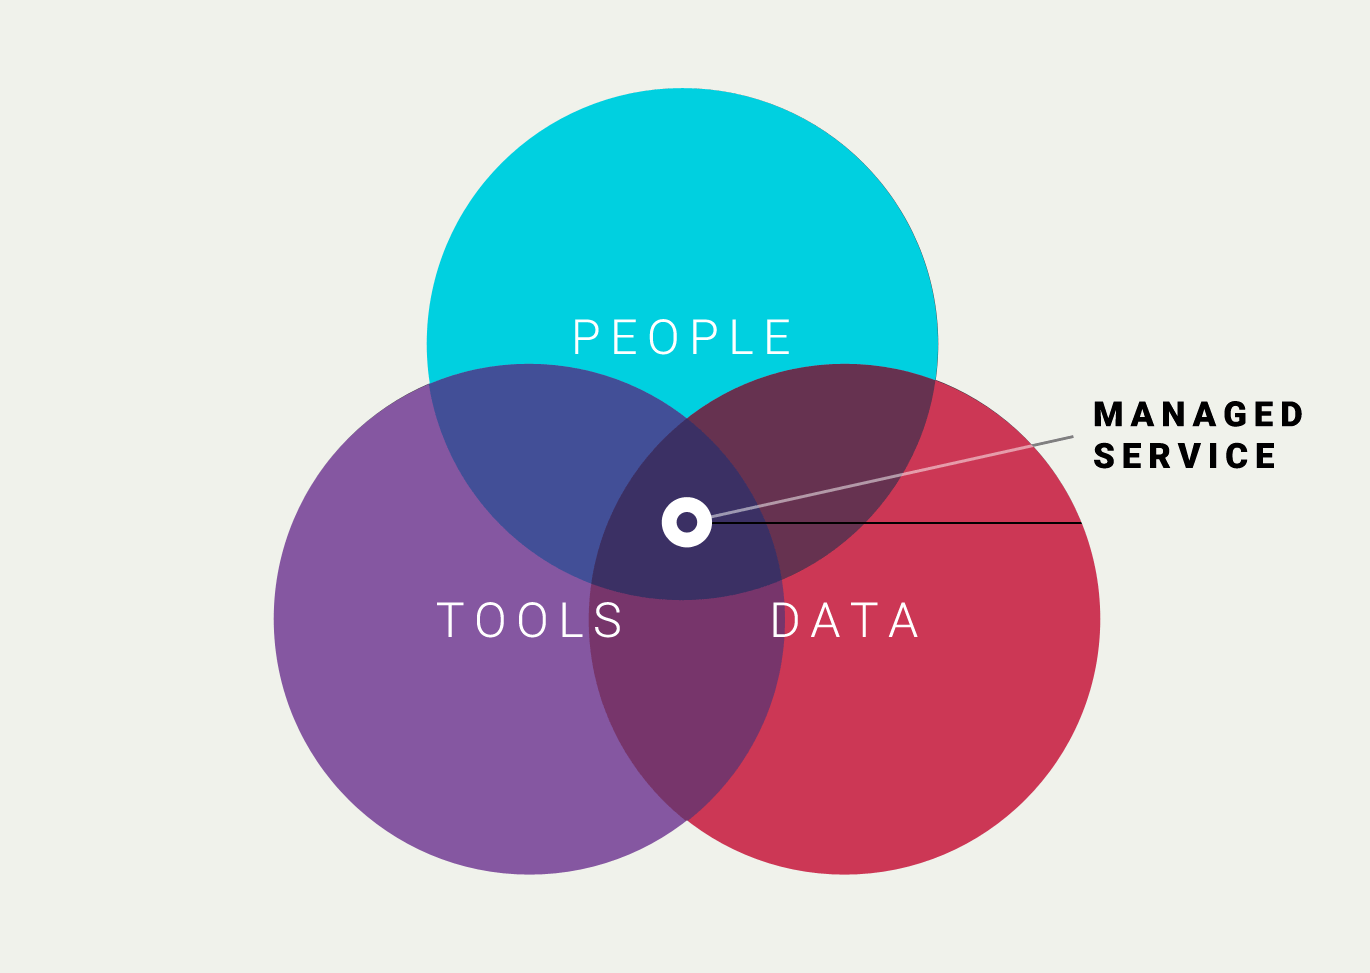 Professional services combine tools, data and people